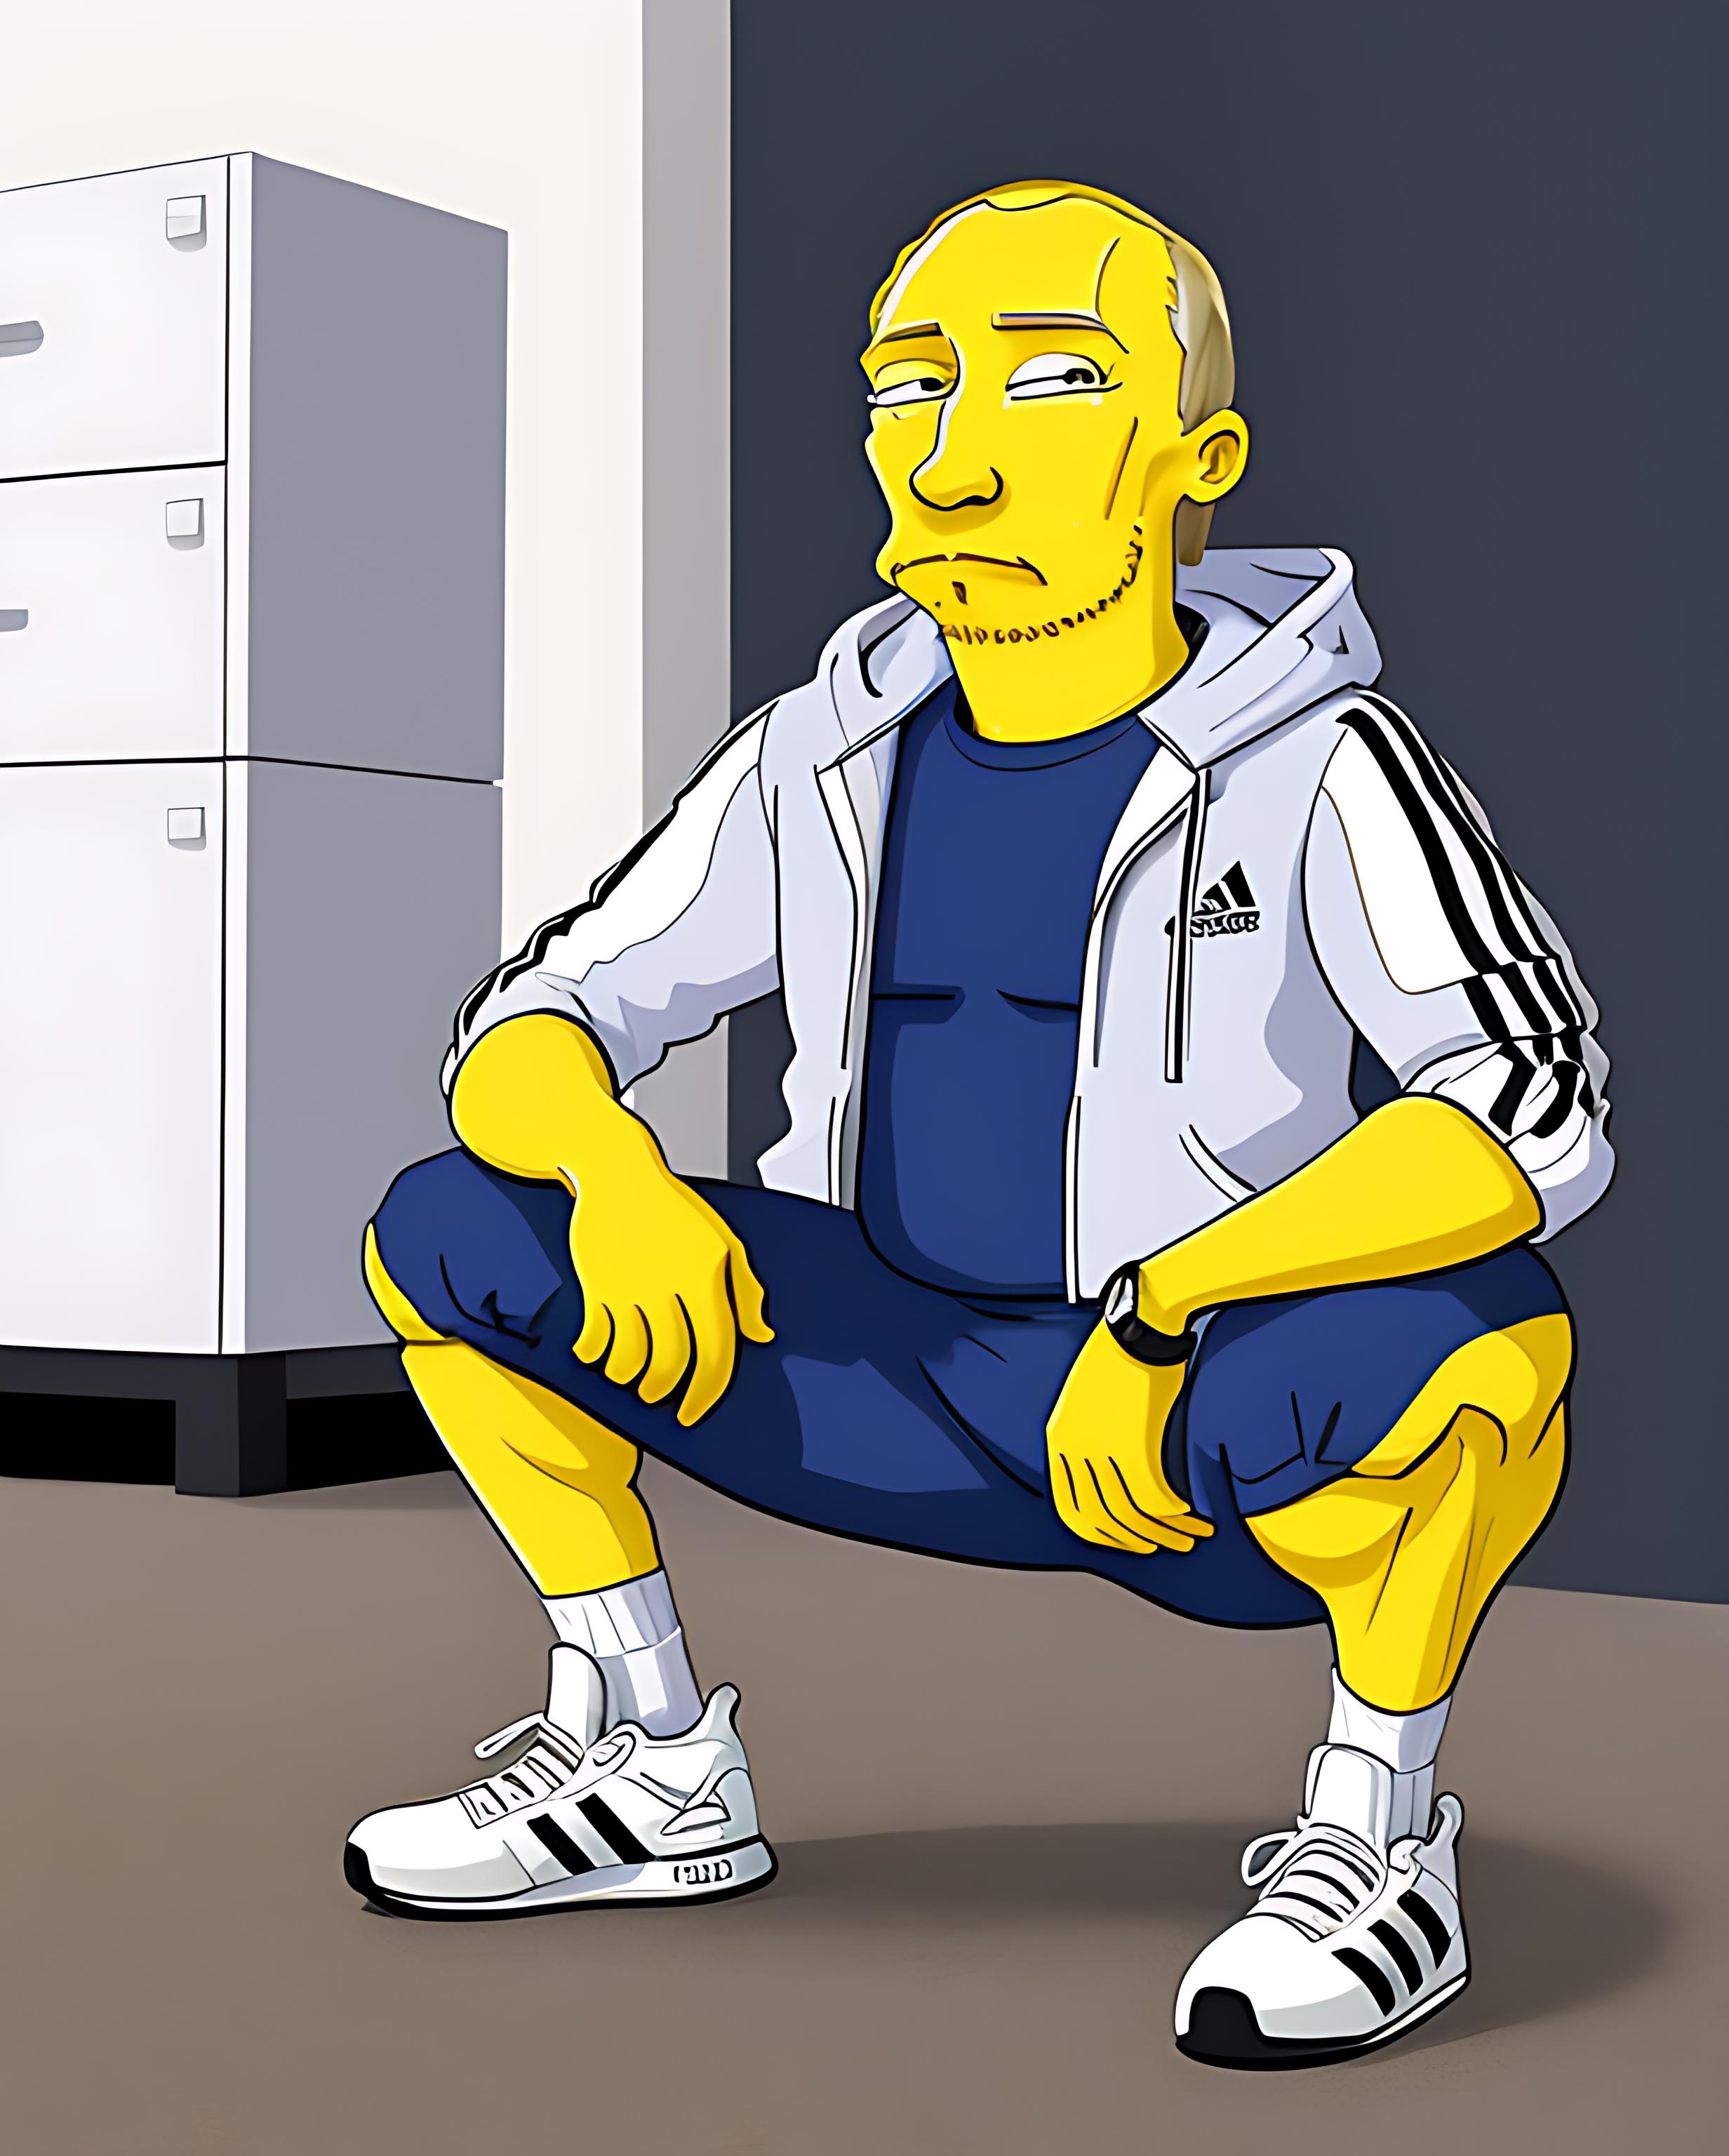 A cartoon drawing of a man in a white jacket and blue shorts.